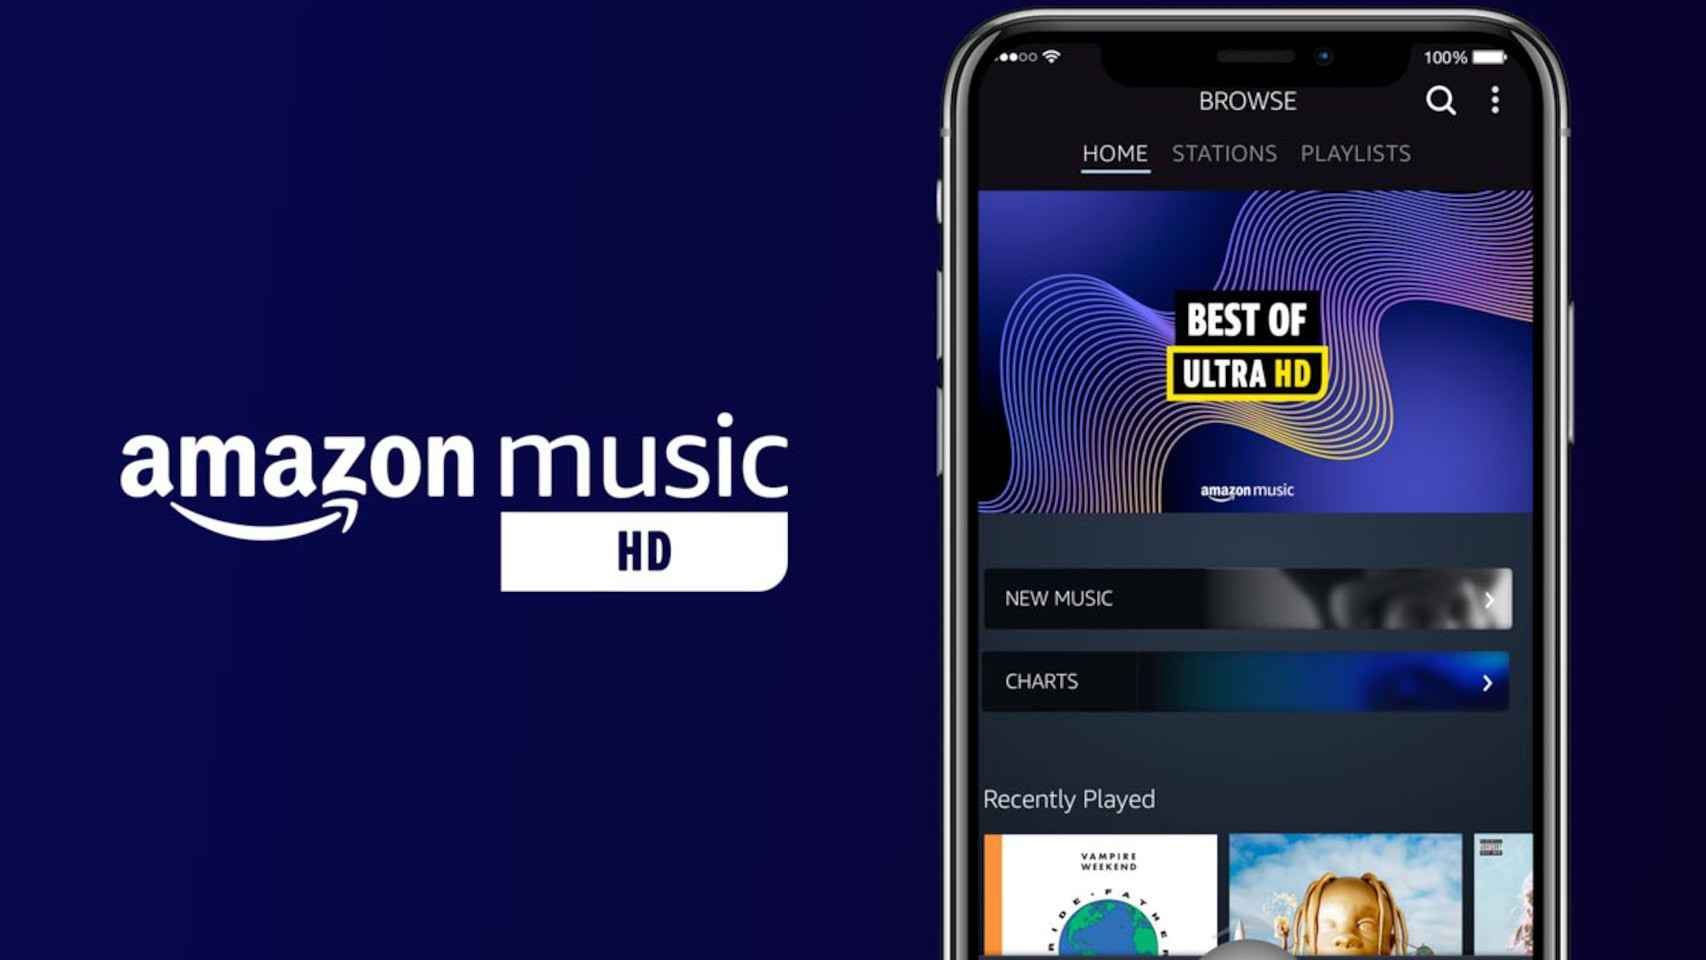 Amazon Music is one of the alternatives for high definition sound